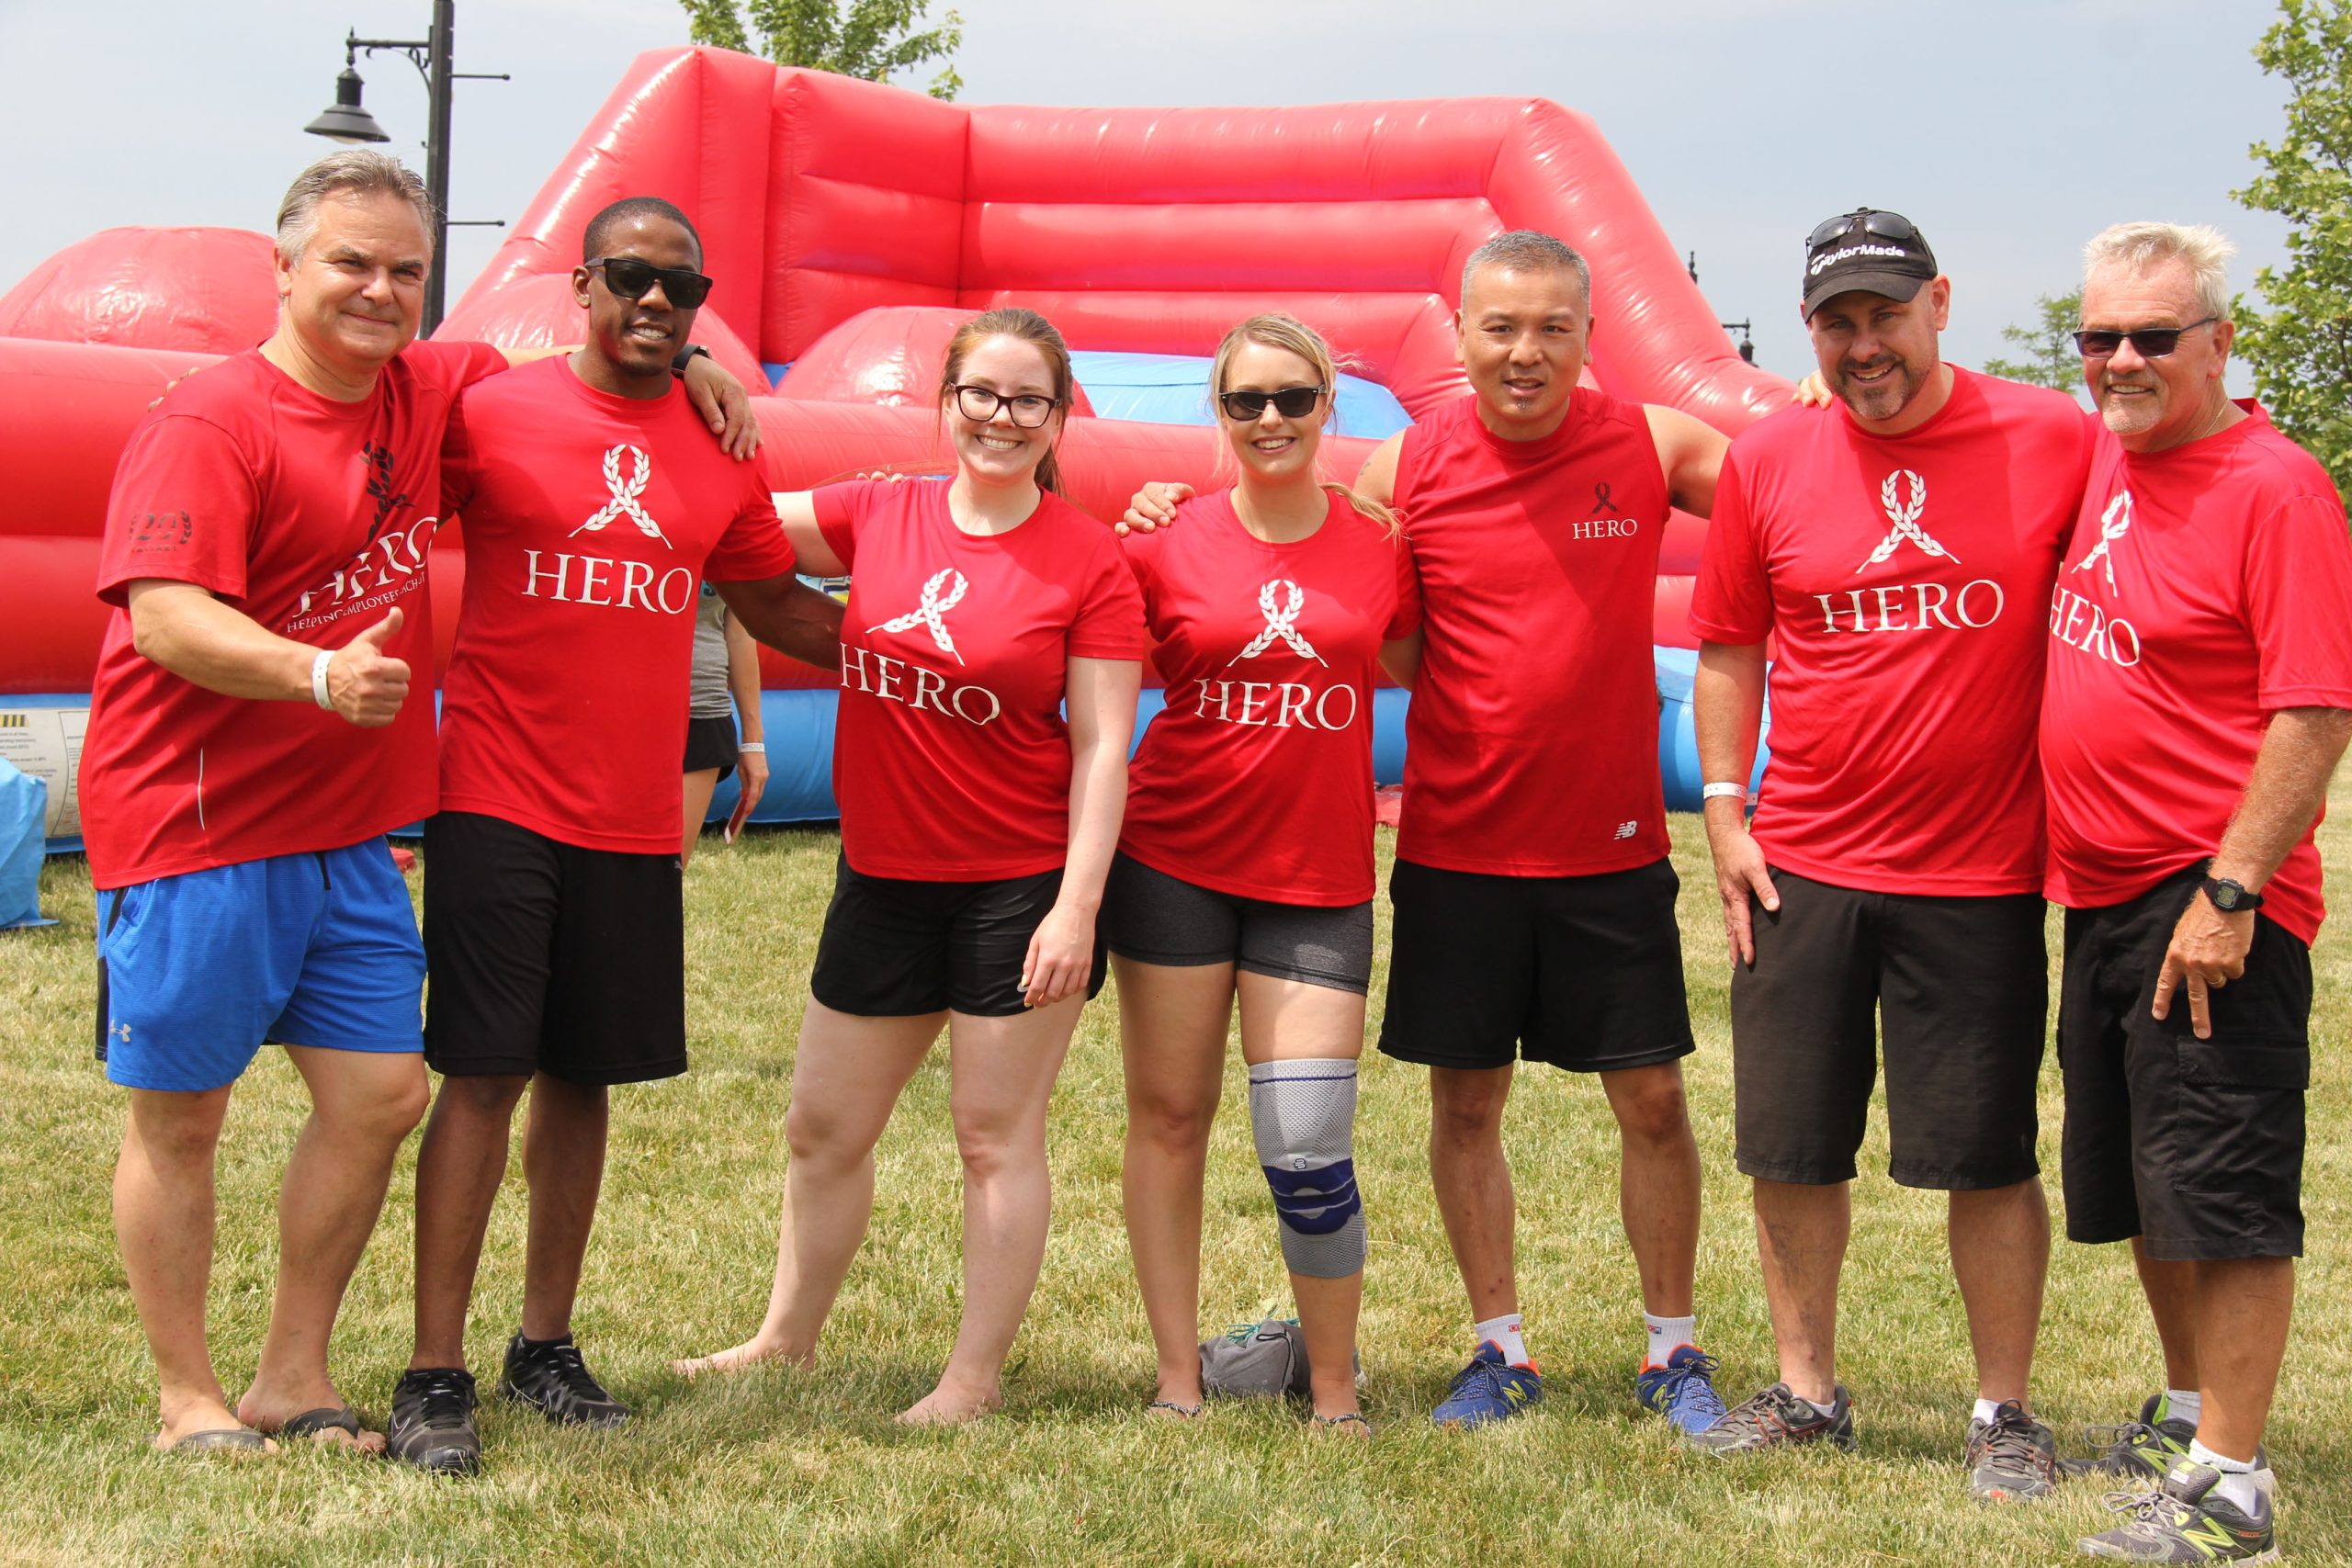 A team stands in matching "Hope" shirts at a previous Corporate Challenge event.